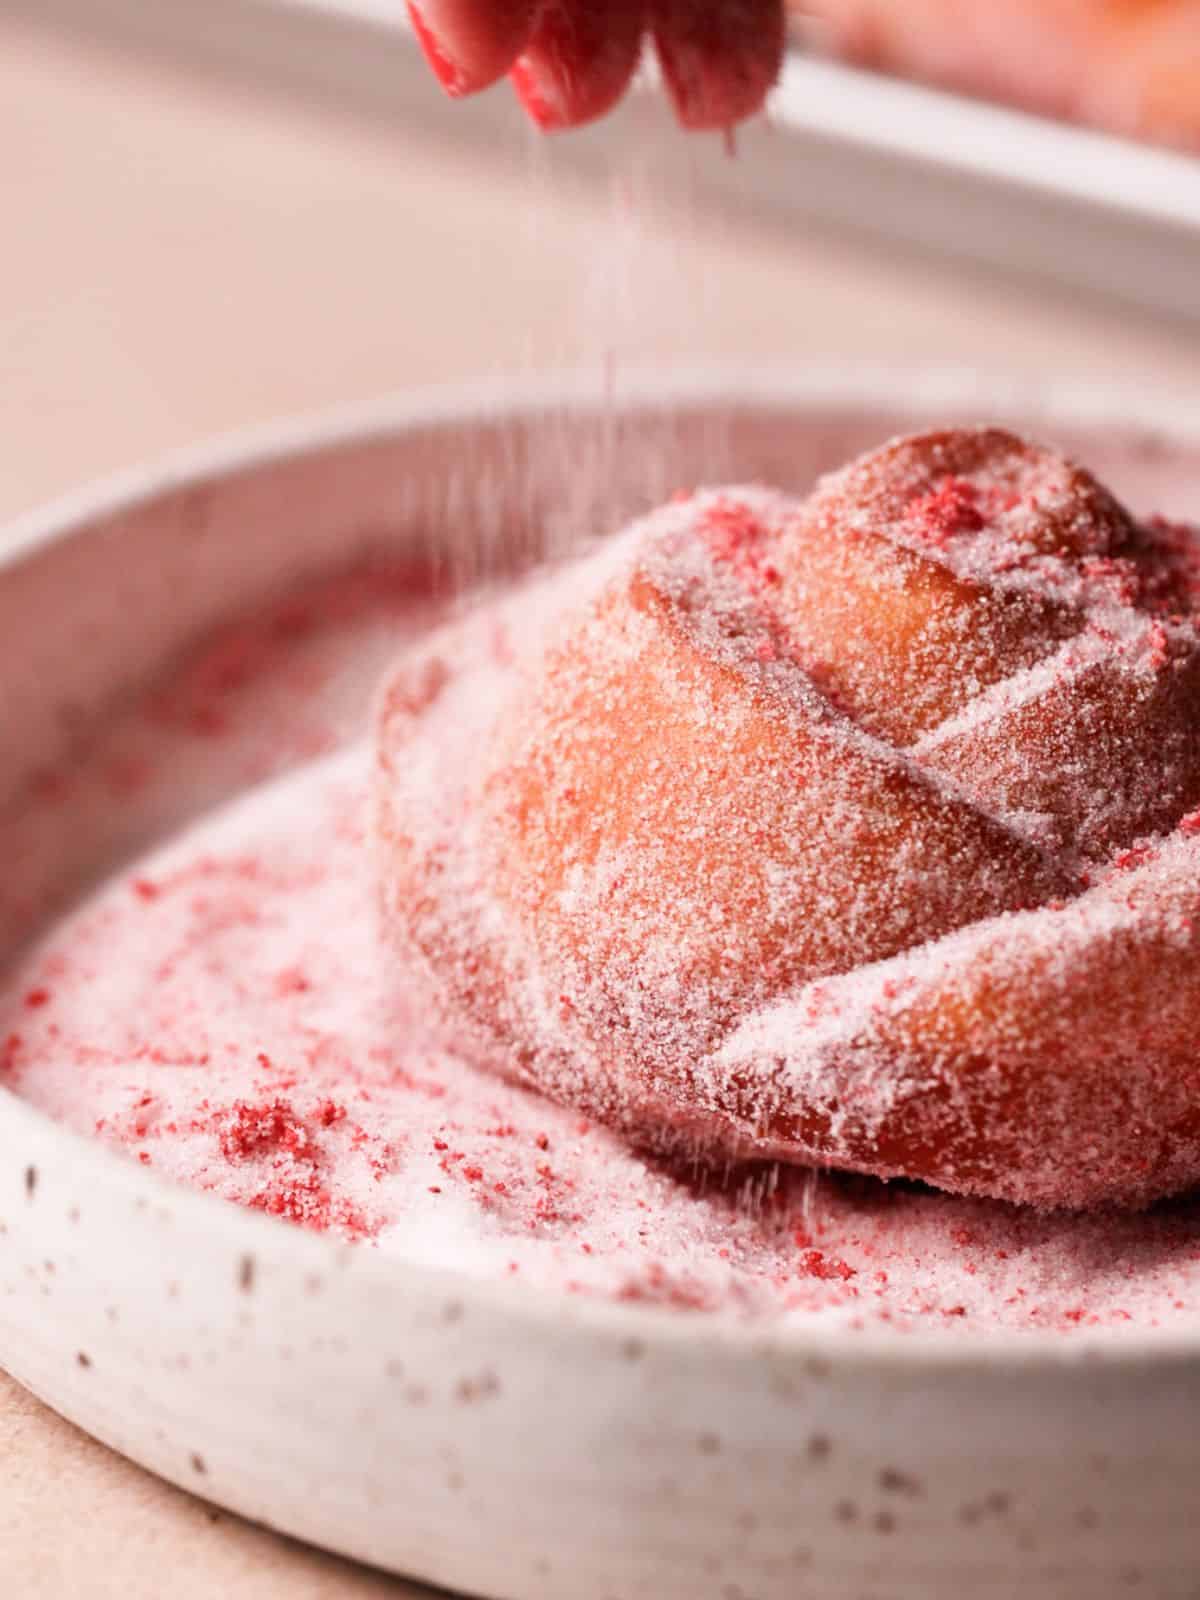 Coating rose donuts in strawberry sugar.